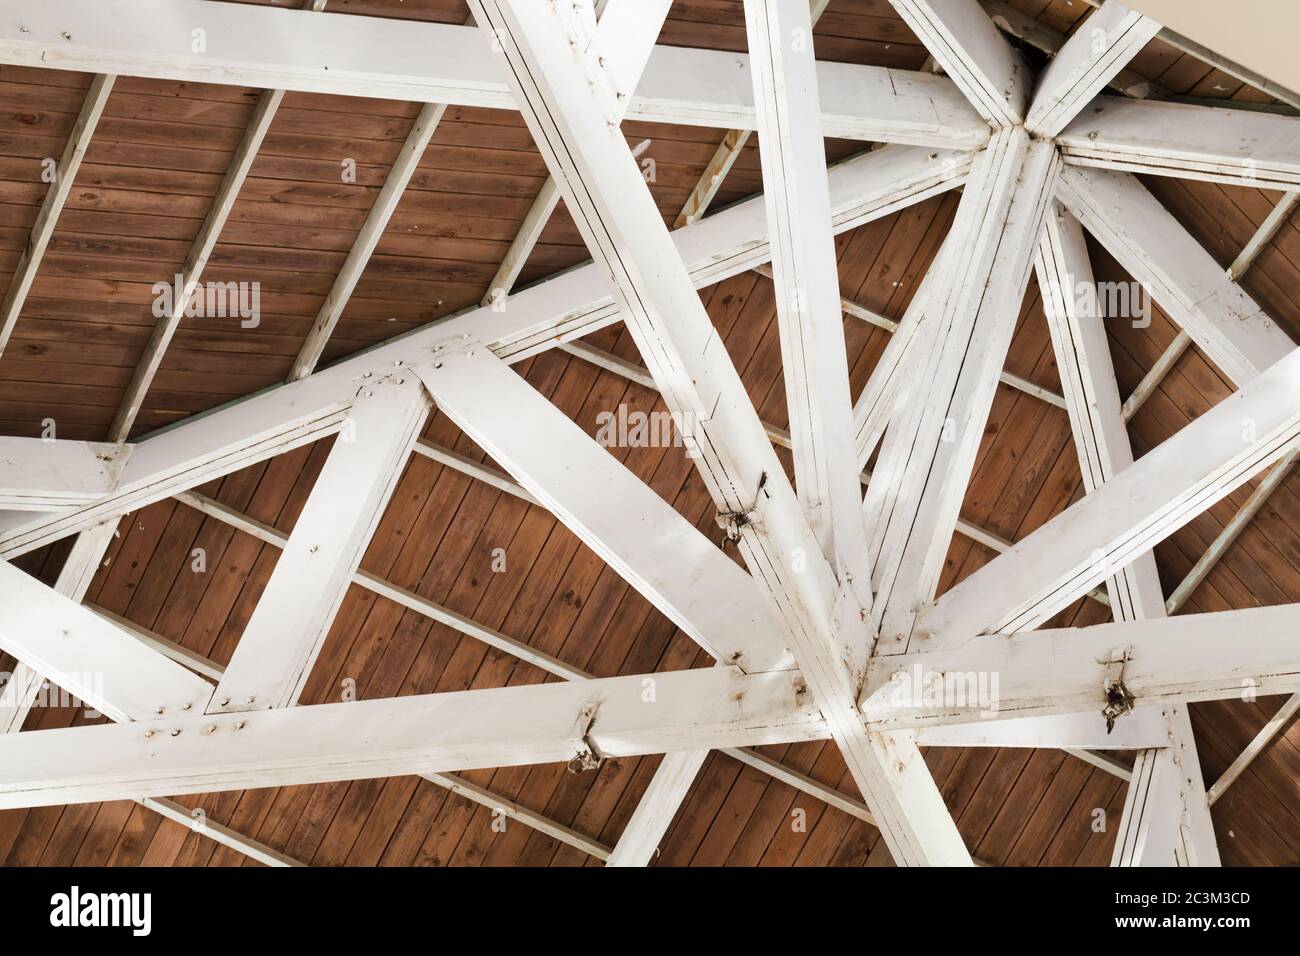 Internal construction of wooden roof with white girders Stock Photo